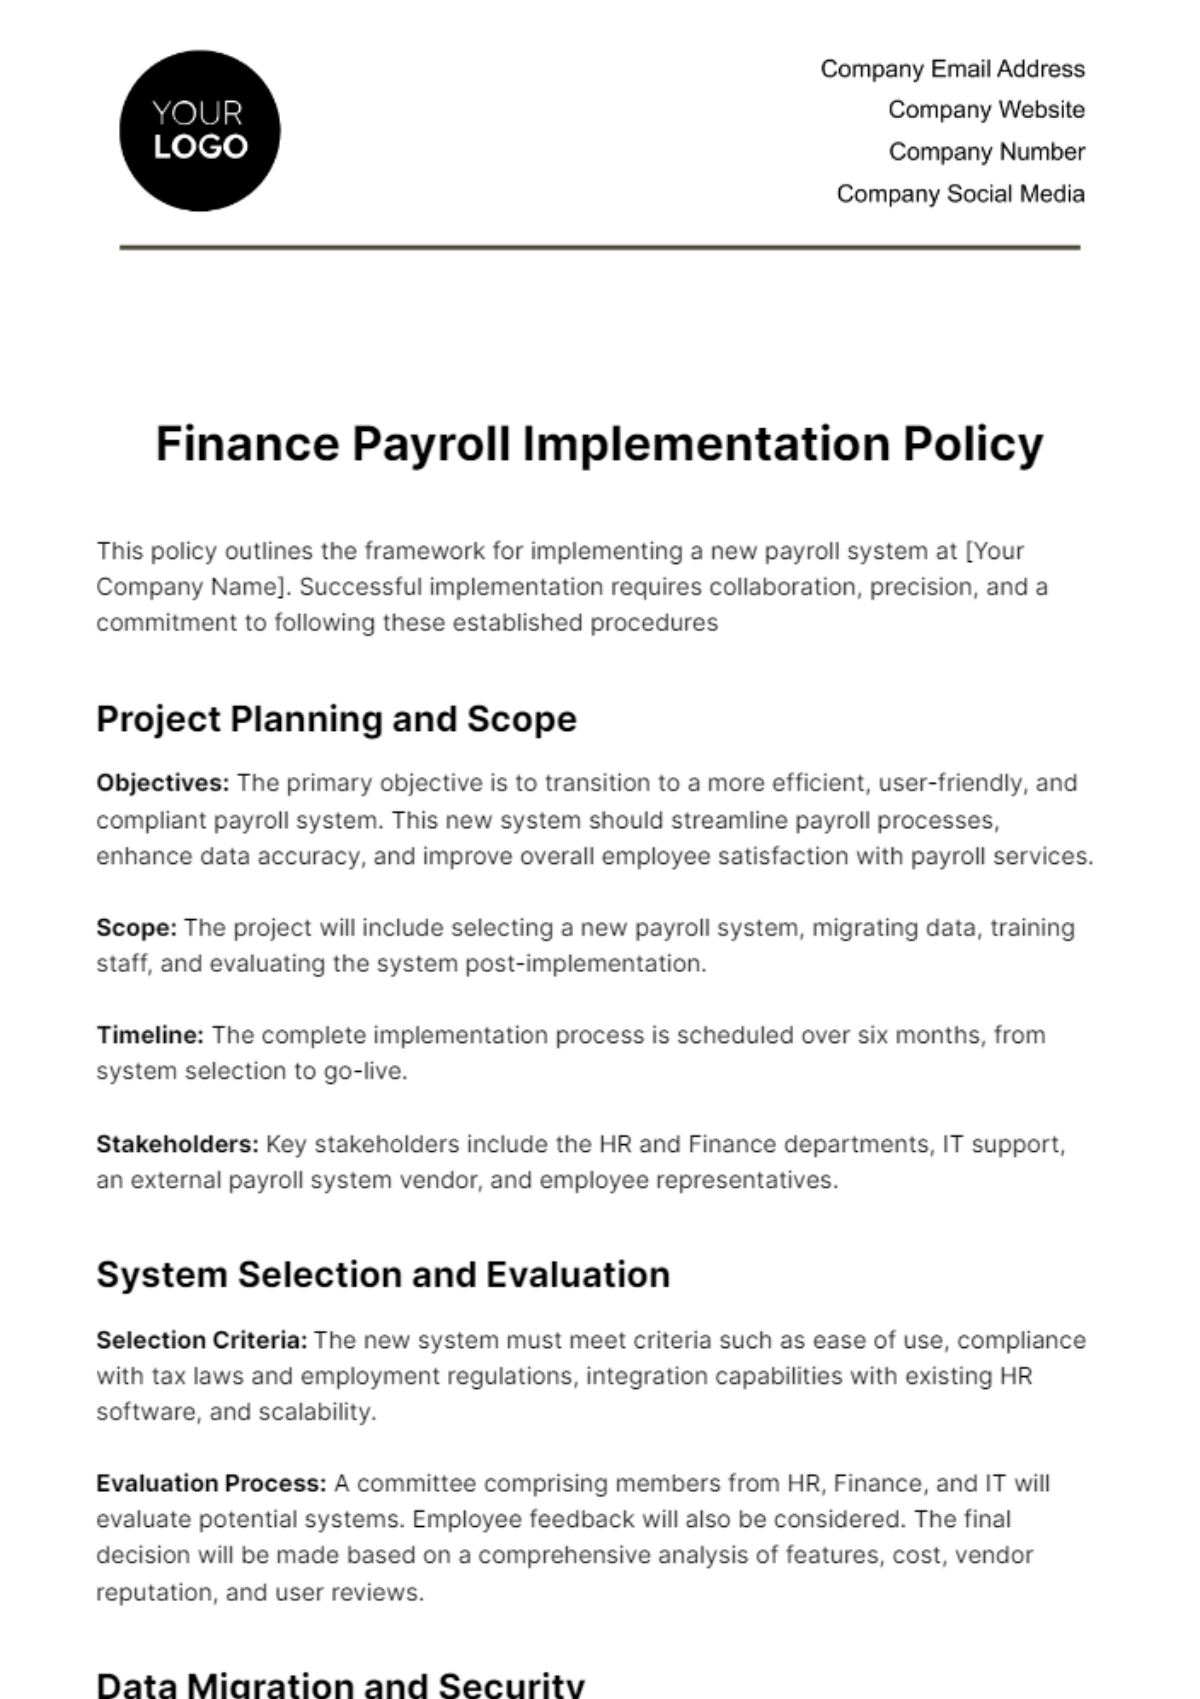 Finance Payroll Implementation Policy Template